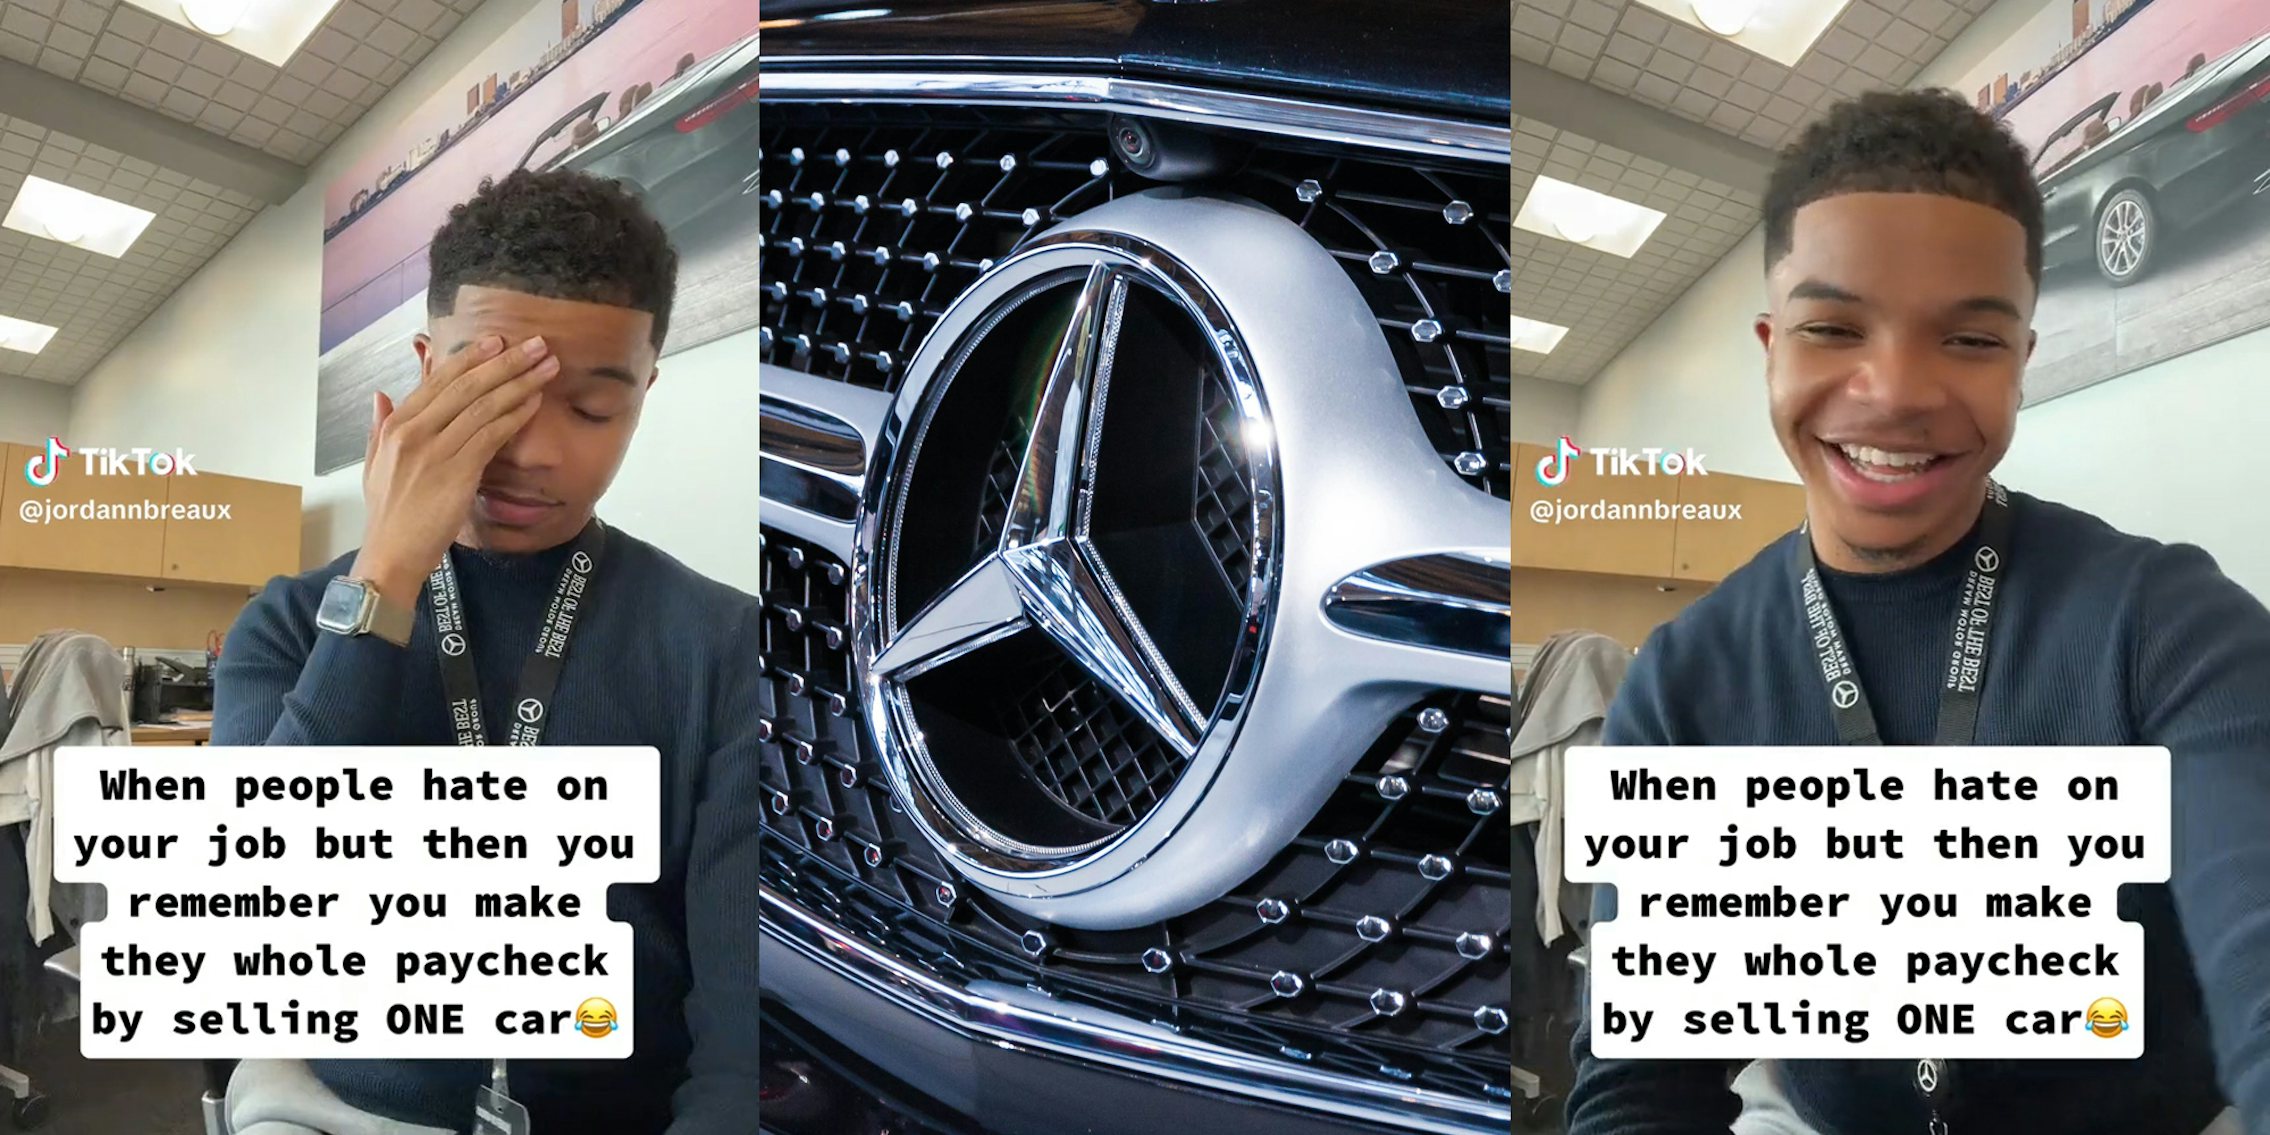 young man in dealership with caption 'When people hate on your job but then you remember you make they whole paycheck by selling ONE car' (l&r) Mercedes Benz grill (c)